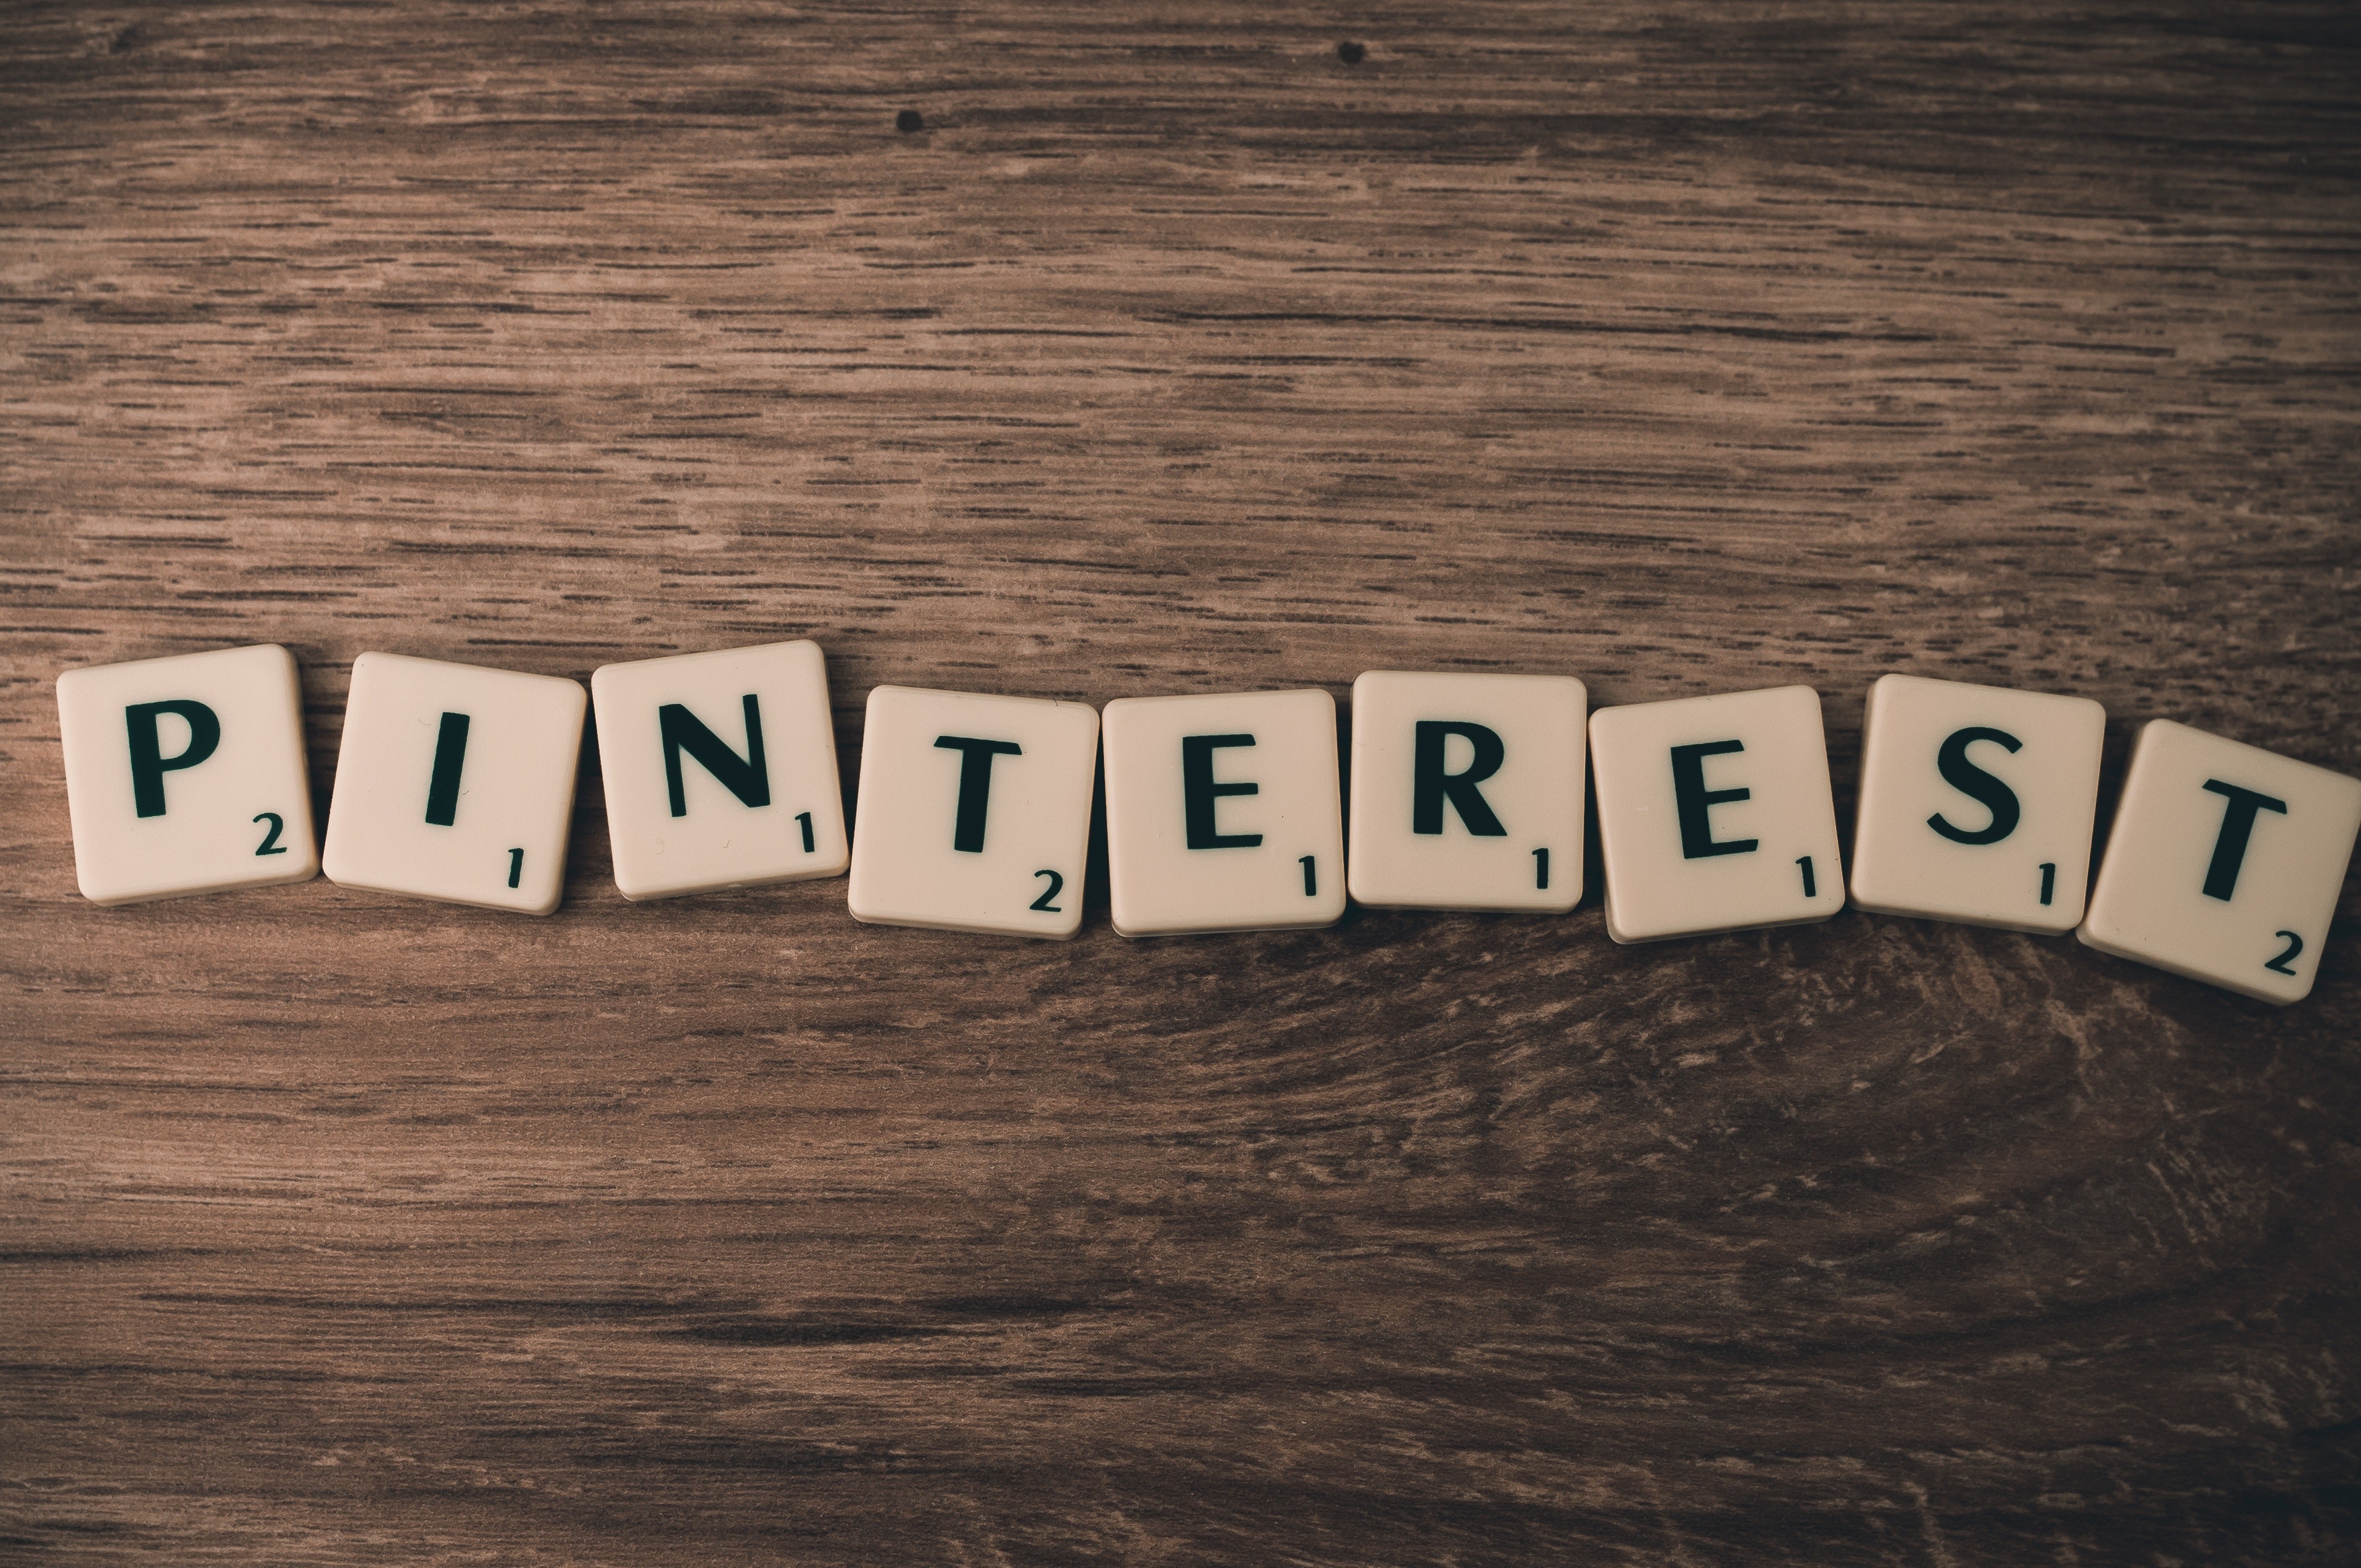 How To Find Pinterest Keywords Using The Free Pinterest Keyword Research Tool For SEO